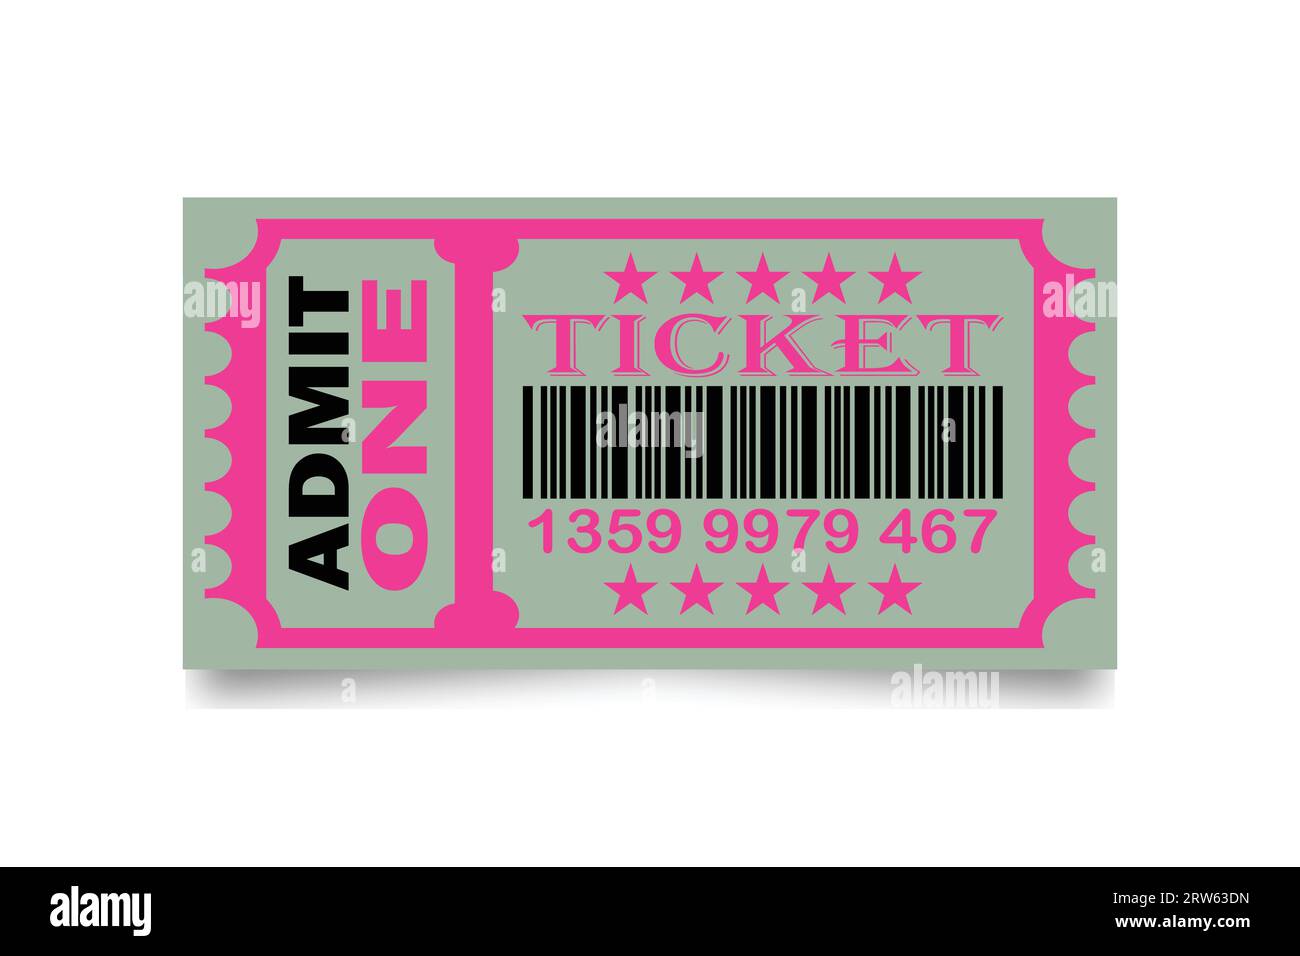 Barcode ticket icon. Flat illustration of Admit one ticket vector icon for cinema, theater, concert, performance, party, event, festival. Stock Vector